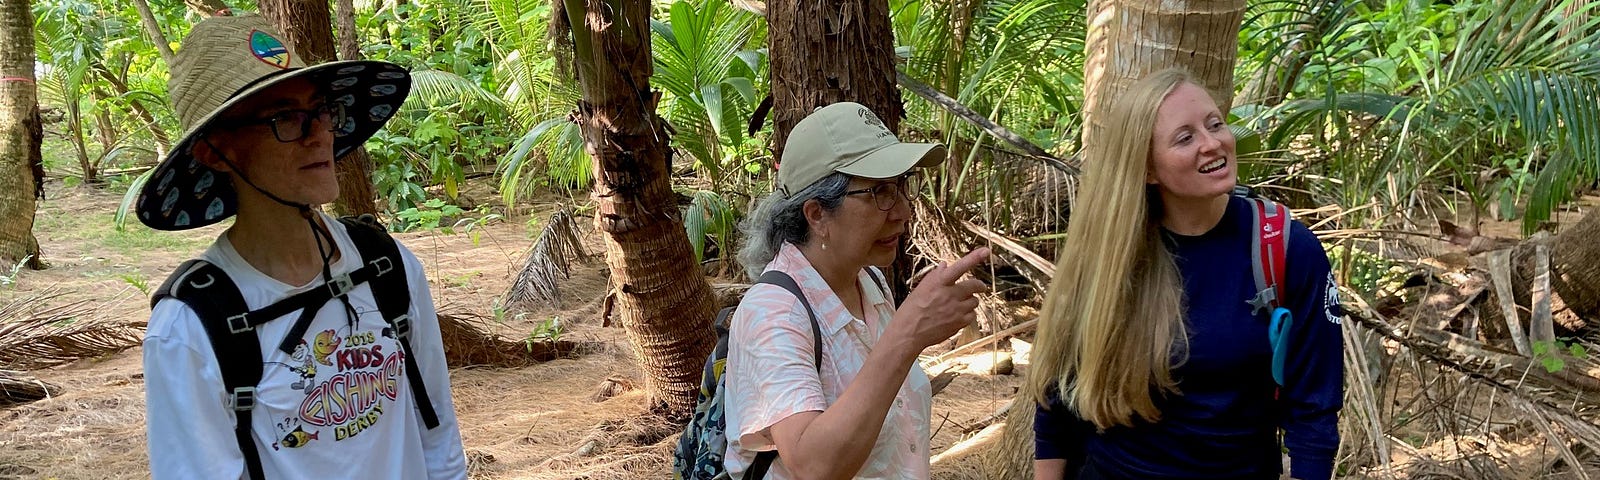 Ruth Utzurrum (center) on Island Dano, Guam, standing with Jay Gutierrez (left), Chief of Guam’s Division of Aquatic and Wildlife Resources (DAWR), and Lauren Thompson (right), wildlife biologist for DAWR. They are standing in a jungle with palm trees in the backdrop.